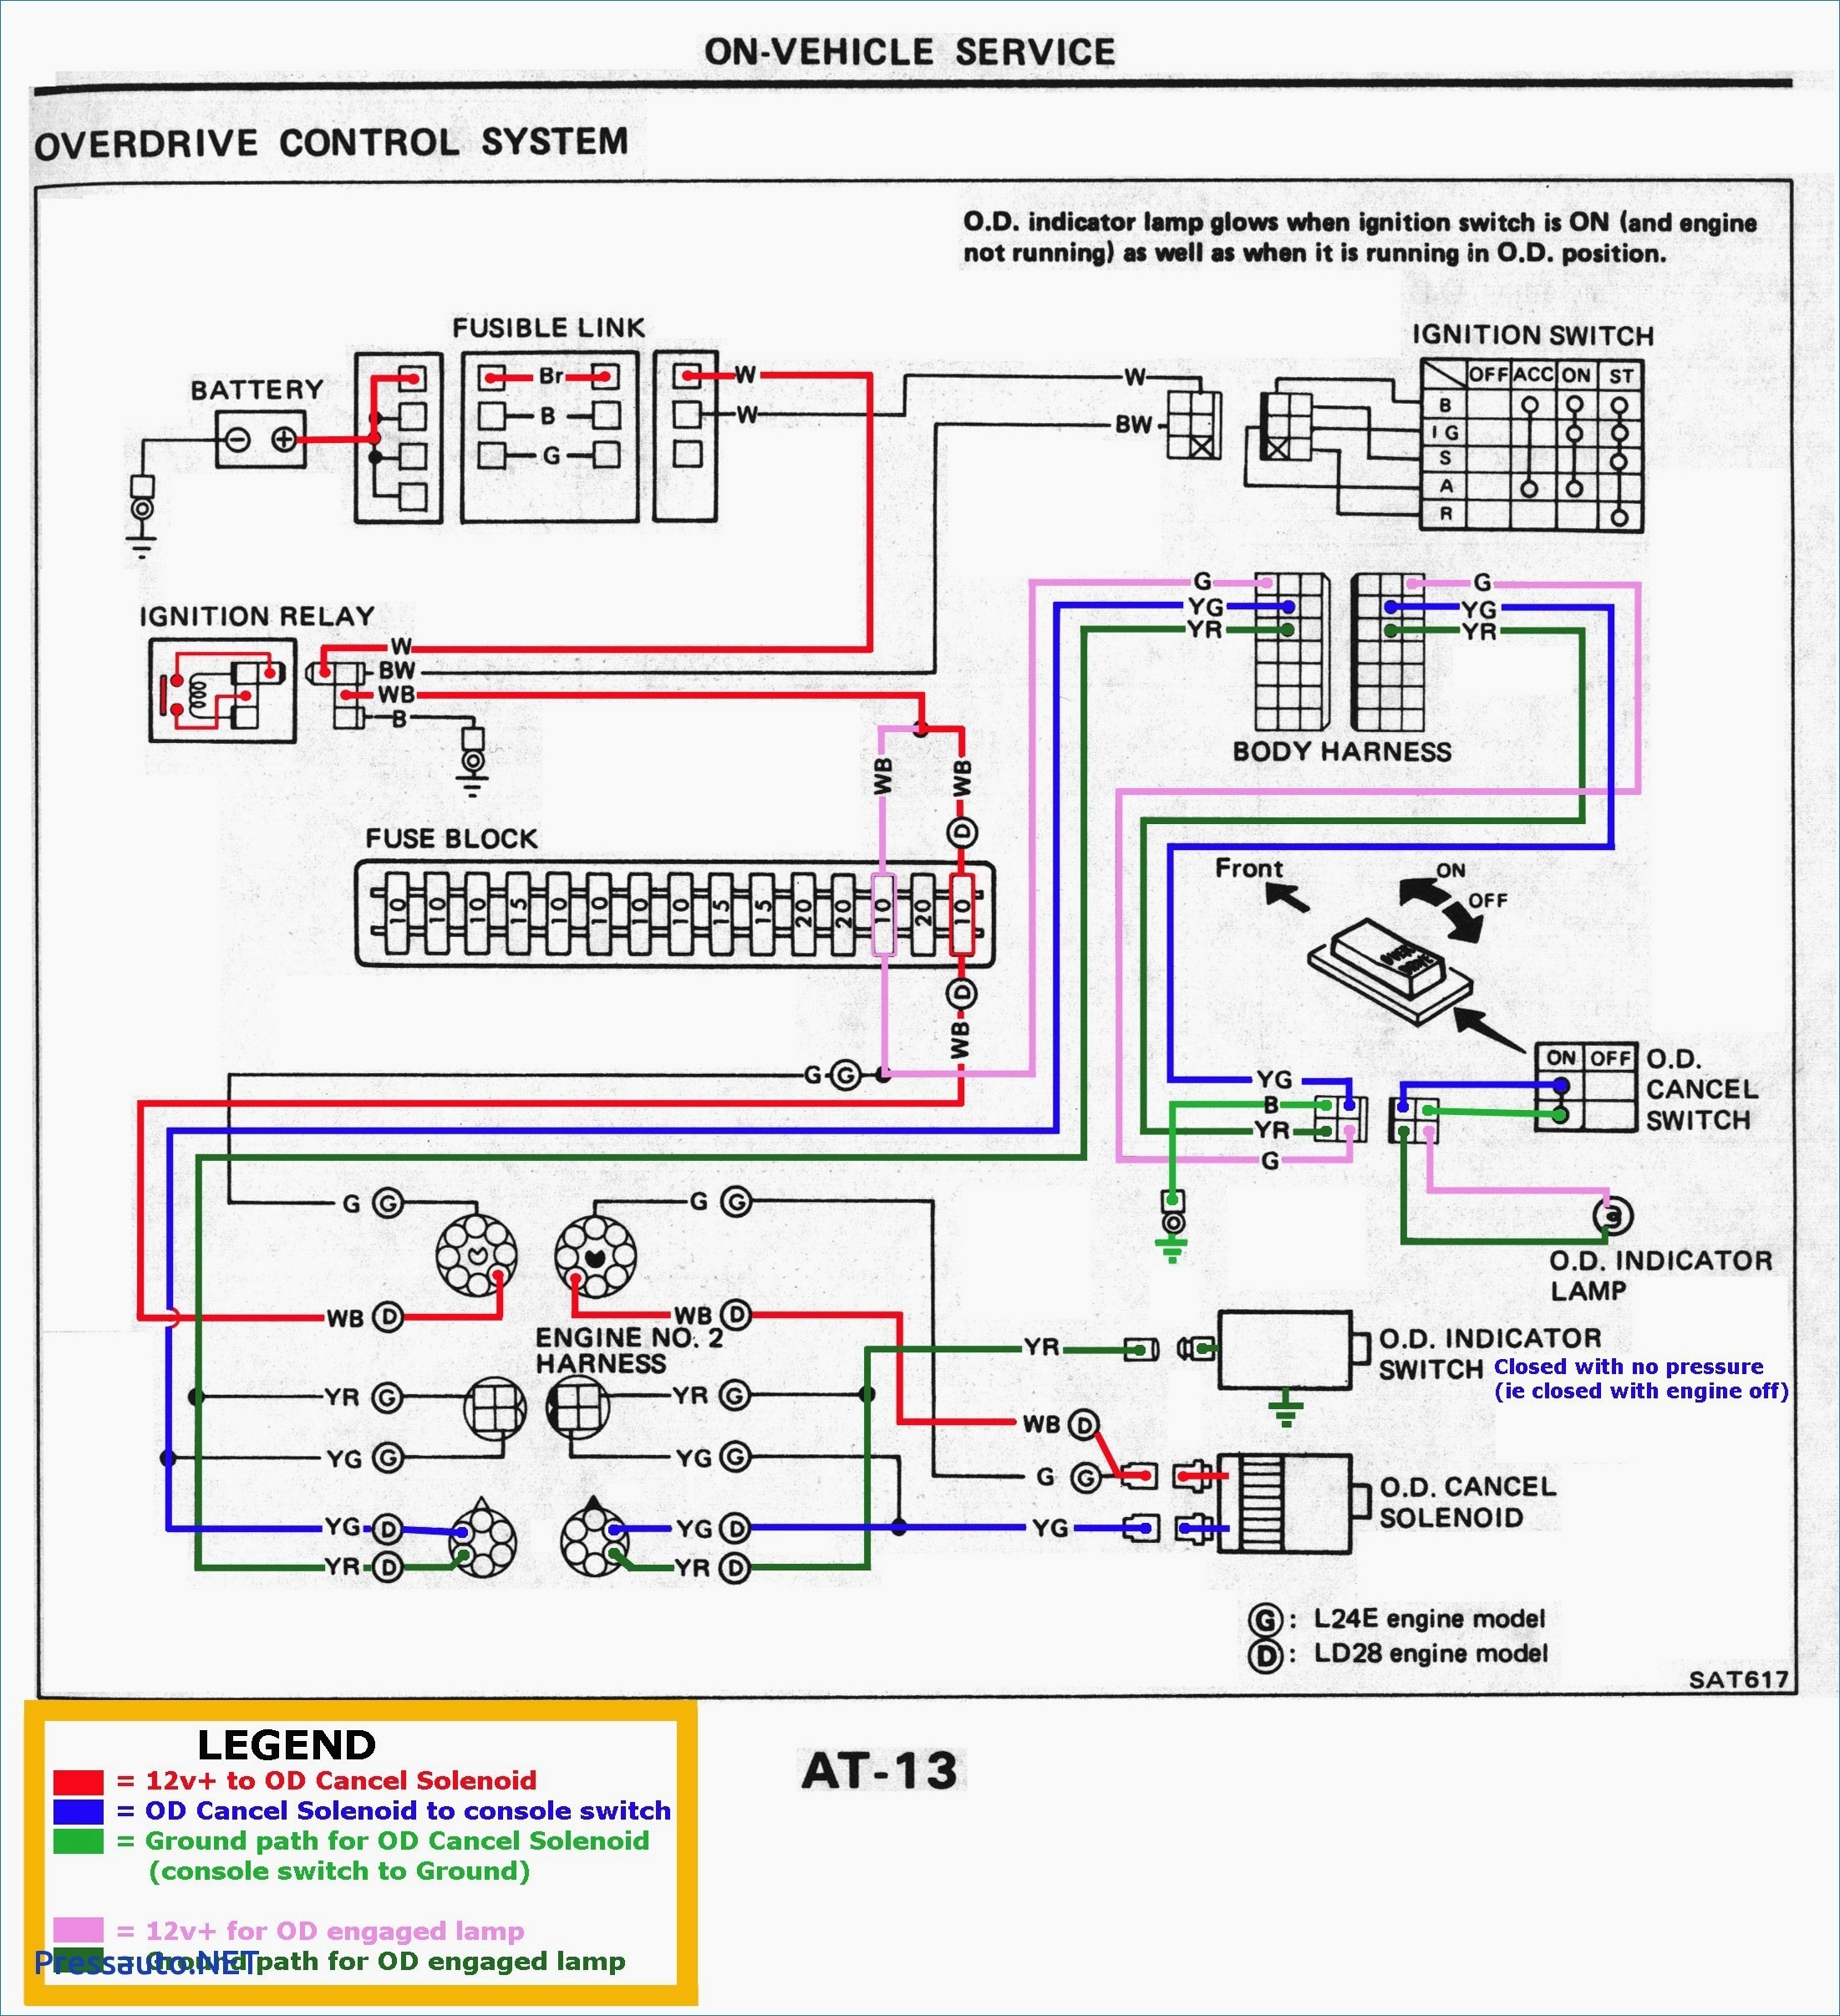 Car Battery Charger Schematic Diagram Free Automotive Wiring Diagrams Download Of Car Battery Charger Schematic Diagram